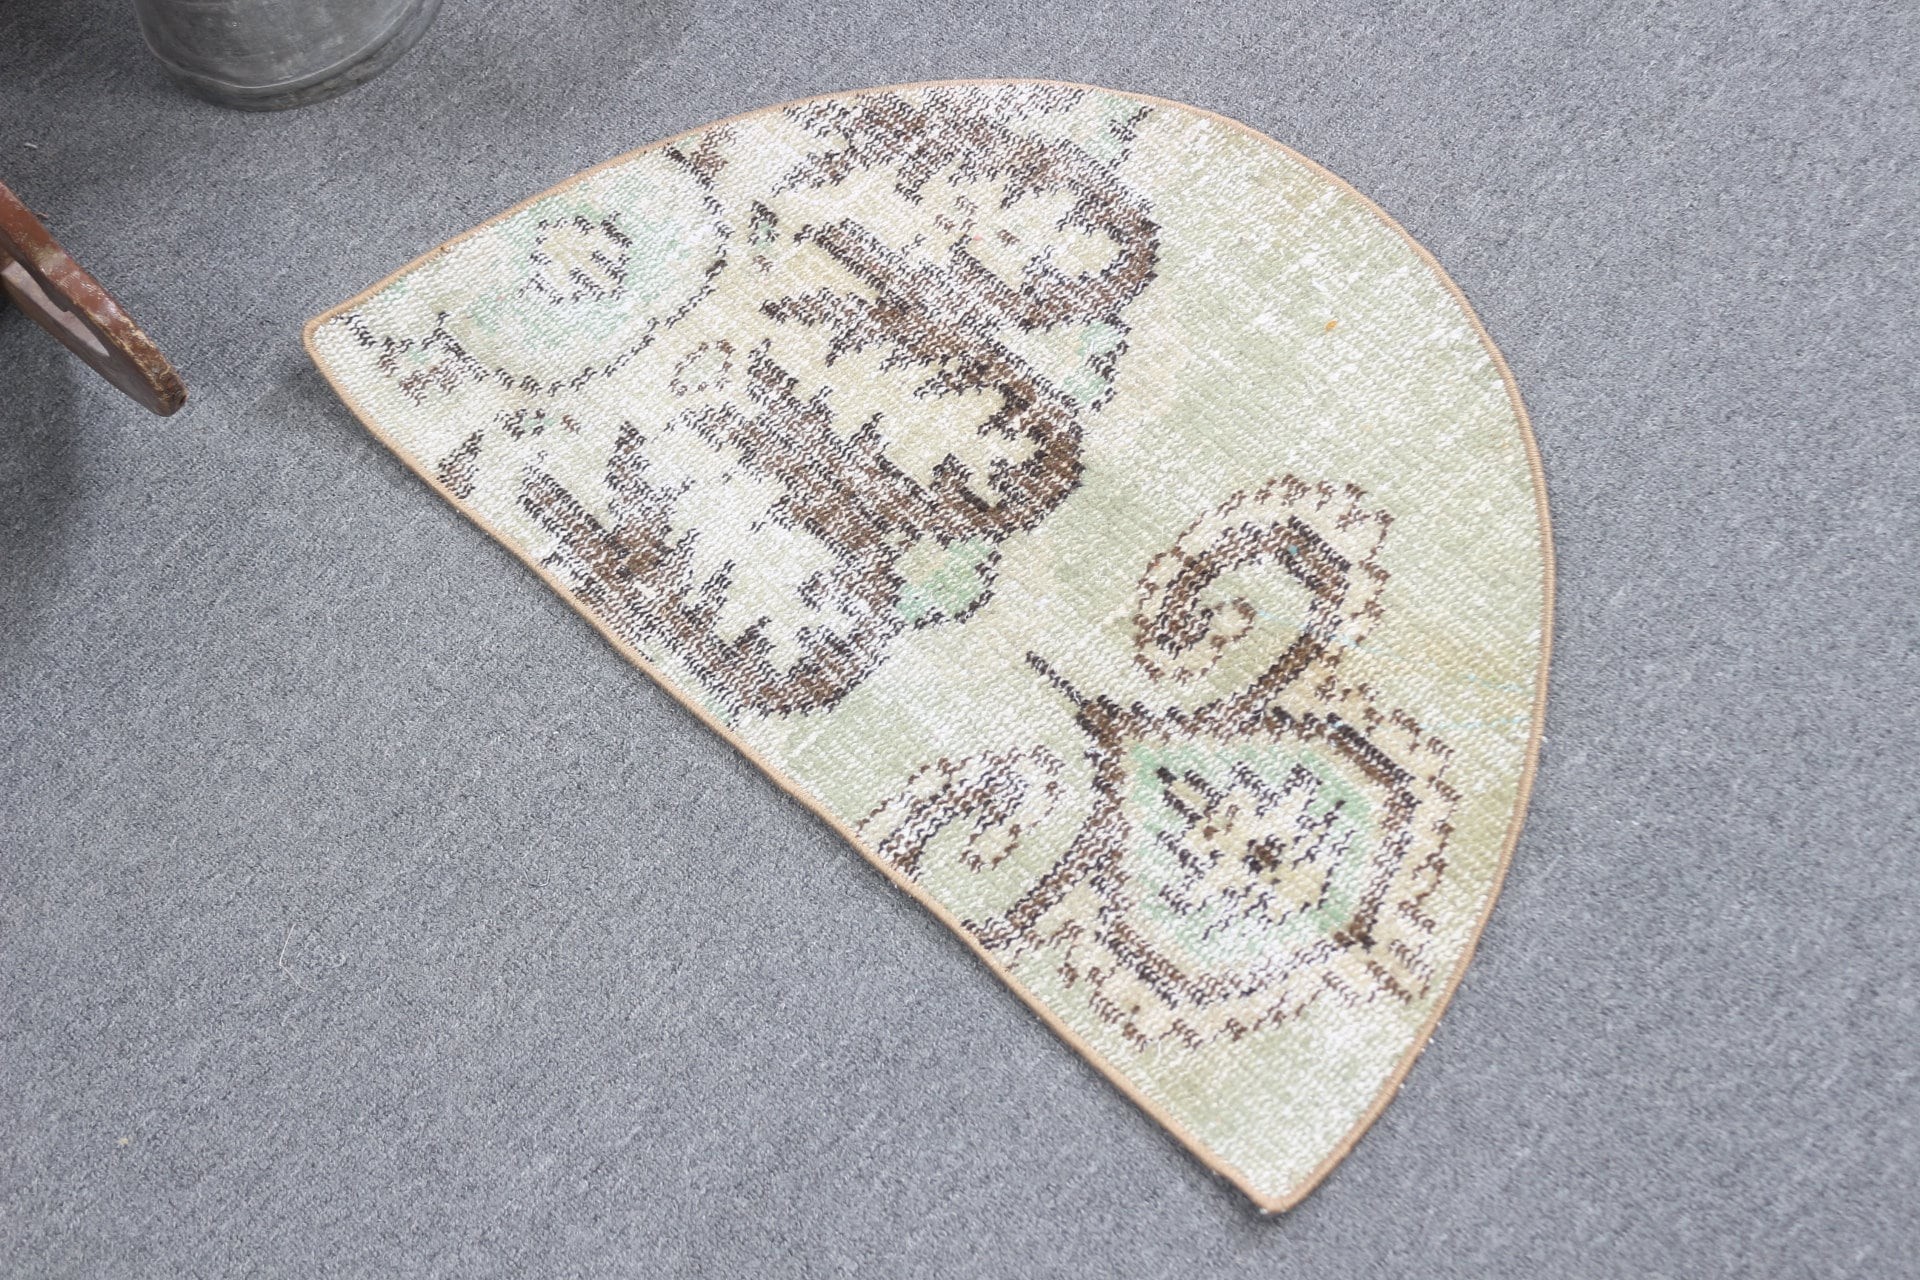 Bathroom Rugs, Antique Rug, Moroccan Rugs, Vintage Rug, 2.5x1.5 ft Small Rugs, Pale Rug, Green Home Decor Rug, Entry Rug, Turkish Rug